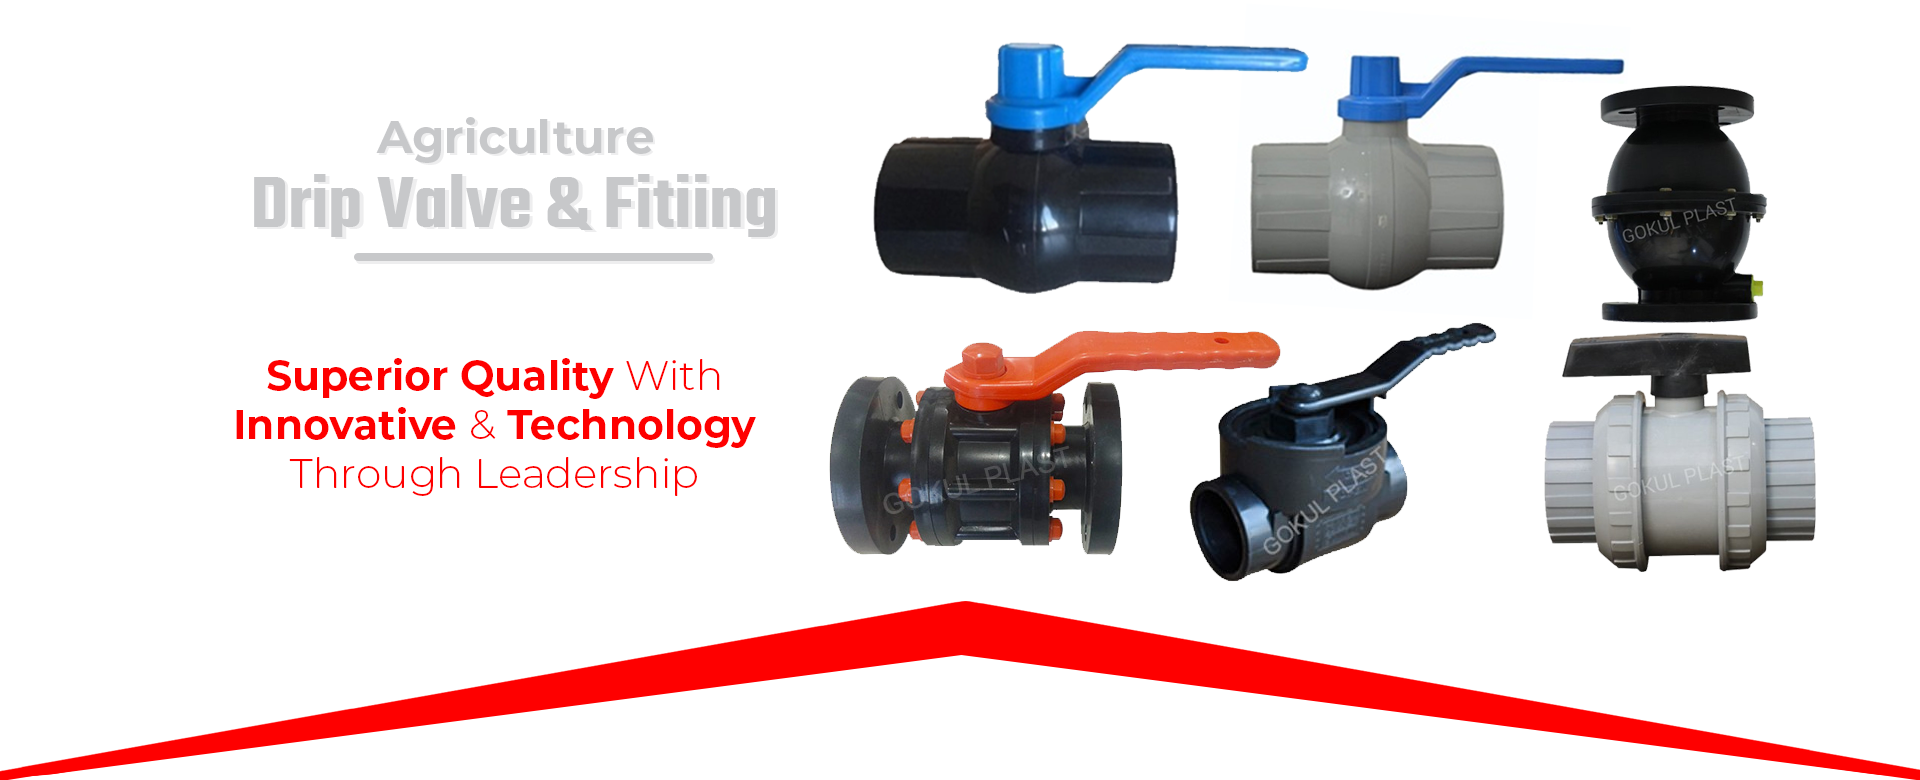 Drip Valve & Fitiing